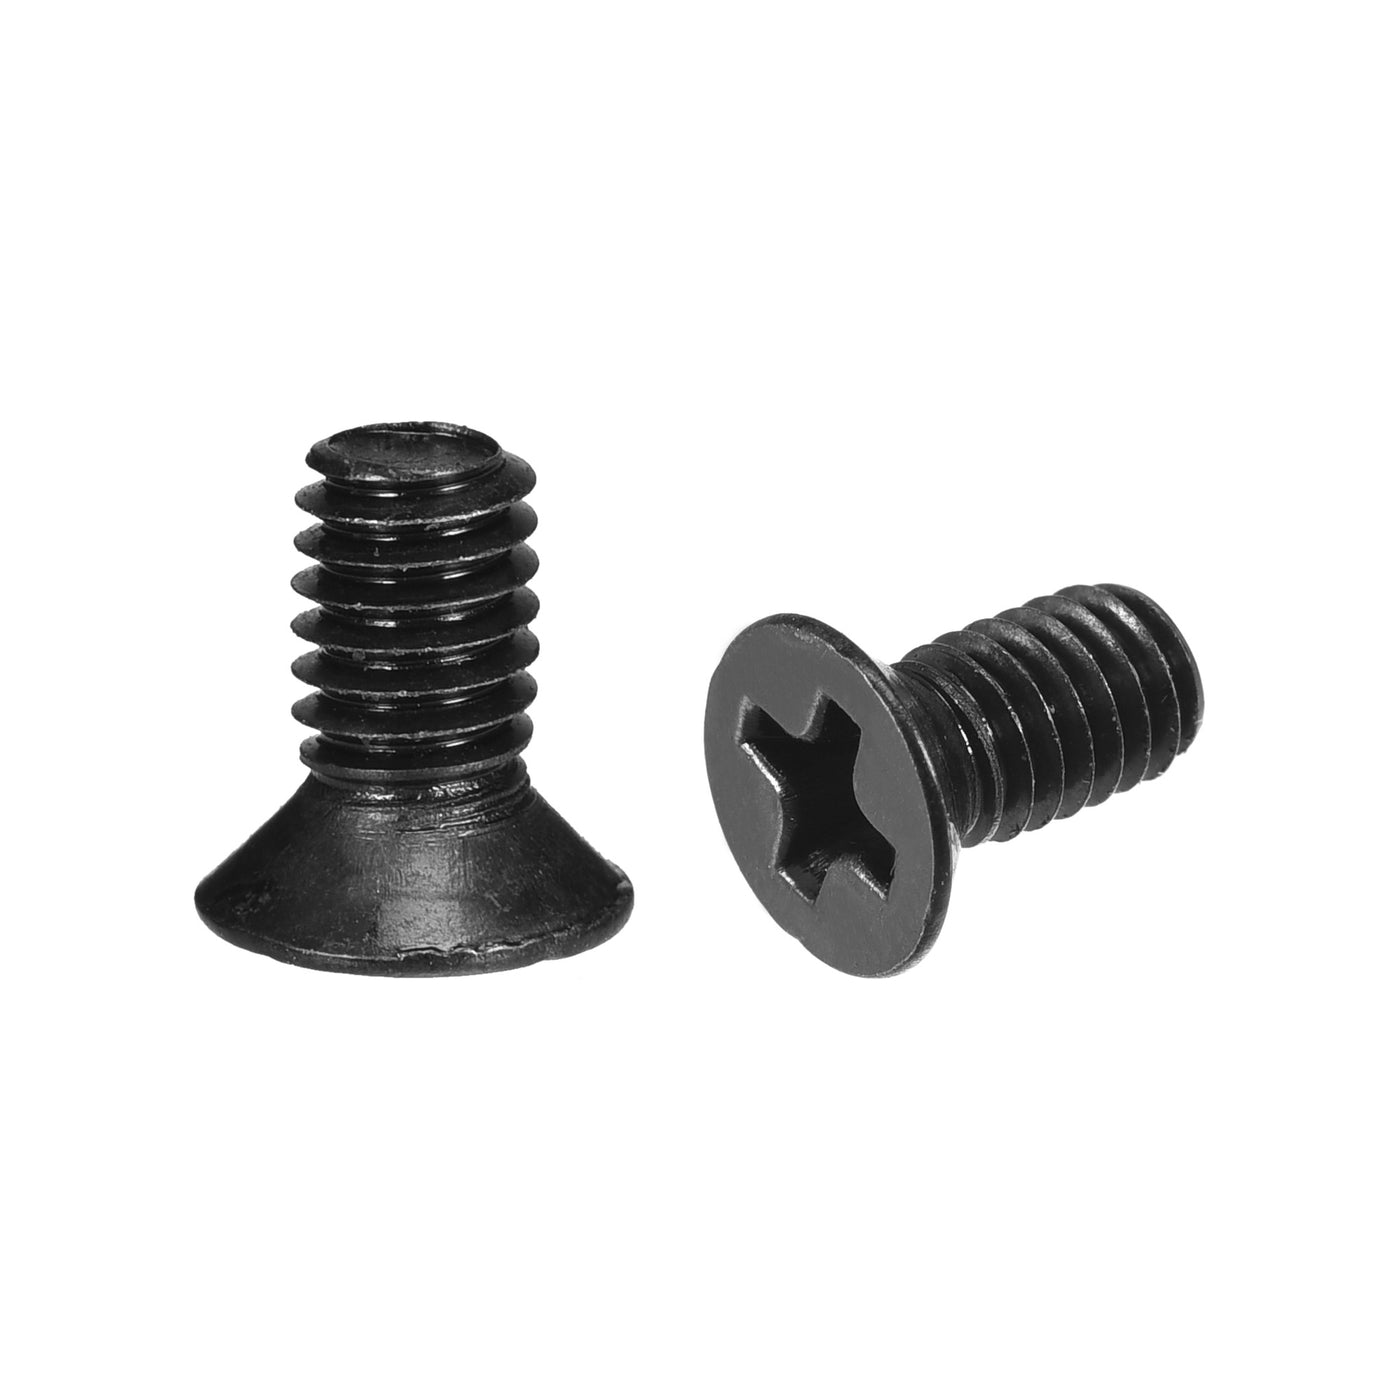 uxcell Uxcell M4 x 8mm Phillips Flat Head Screws Carbon Steel Machine Screws Black for Home Office Computer Case Appliance Equipment 200pcs